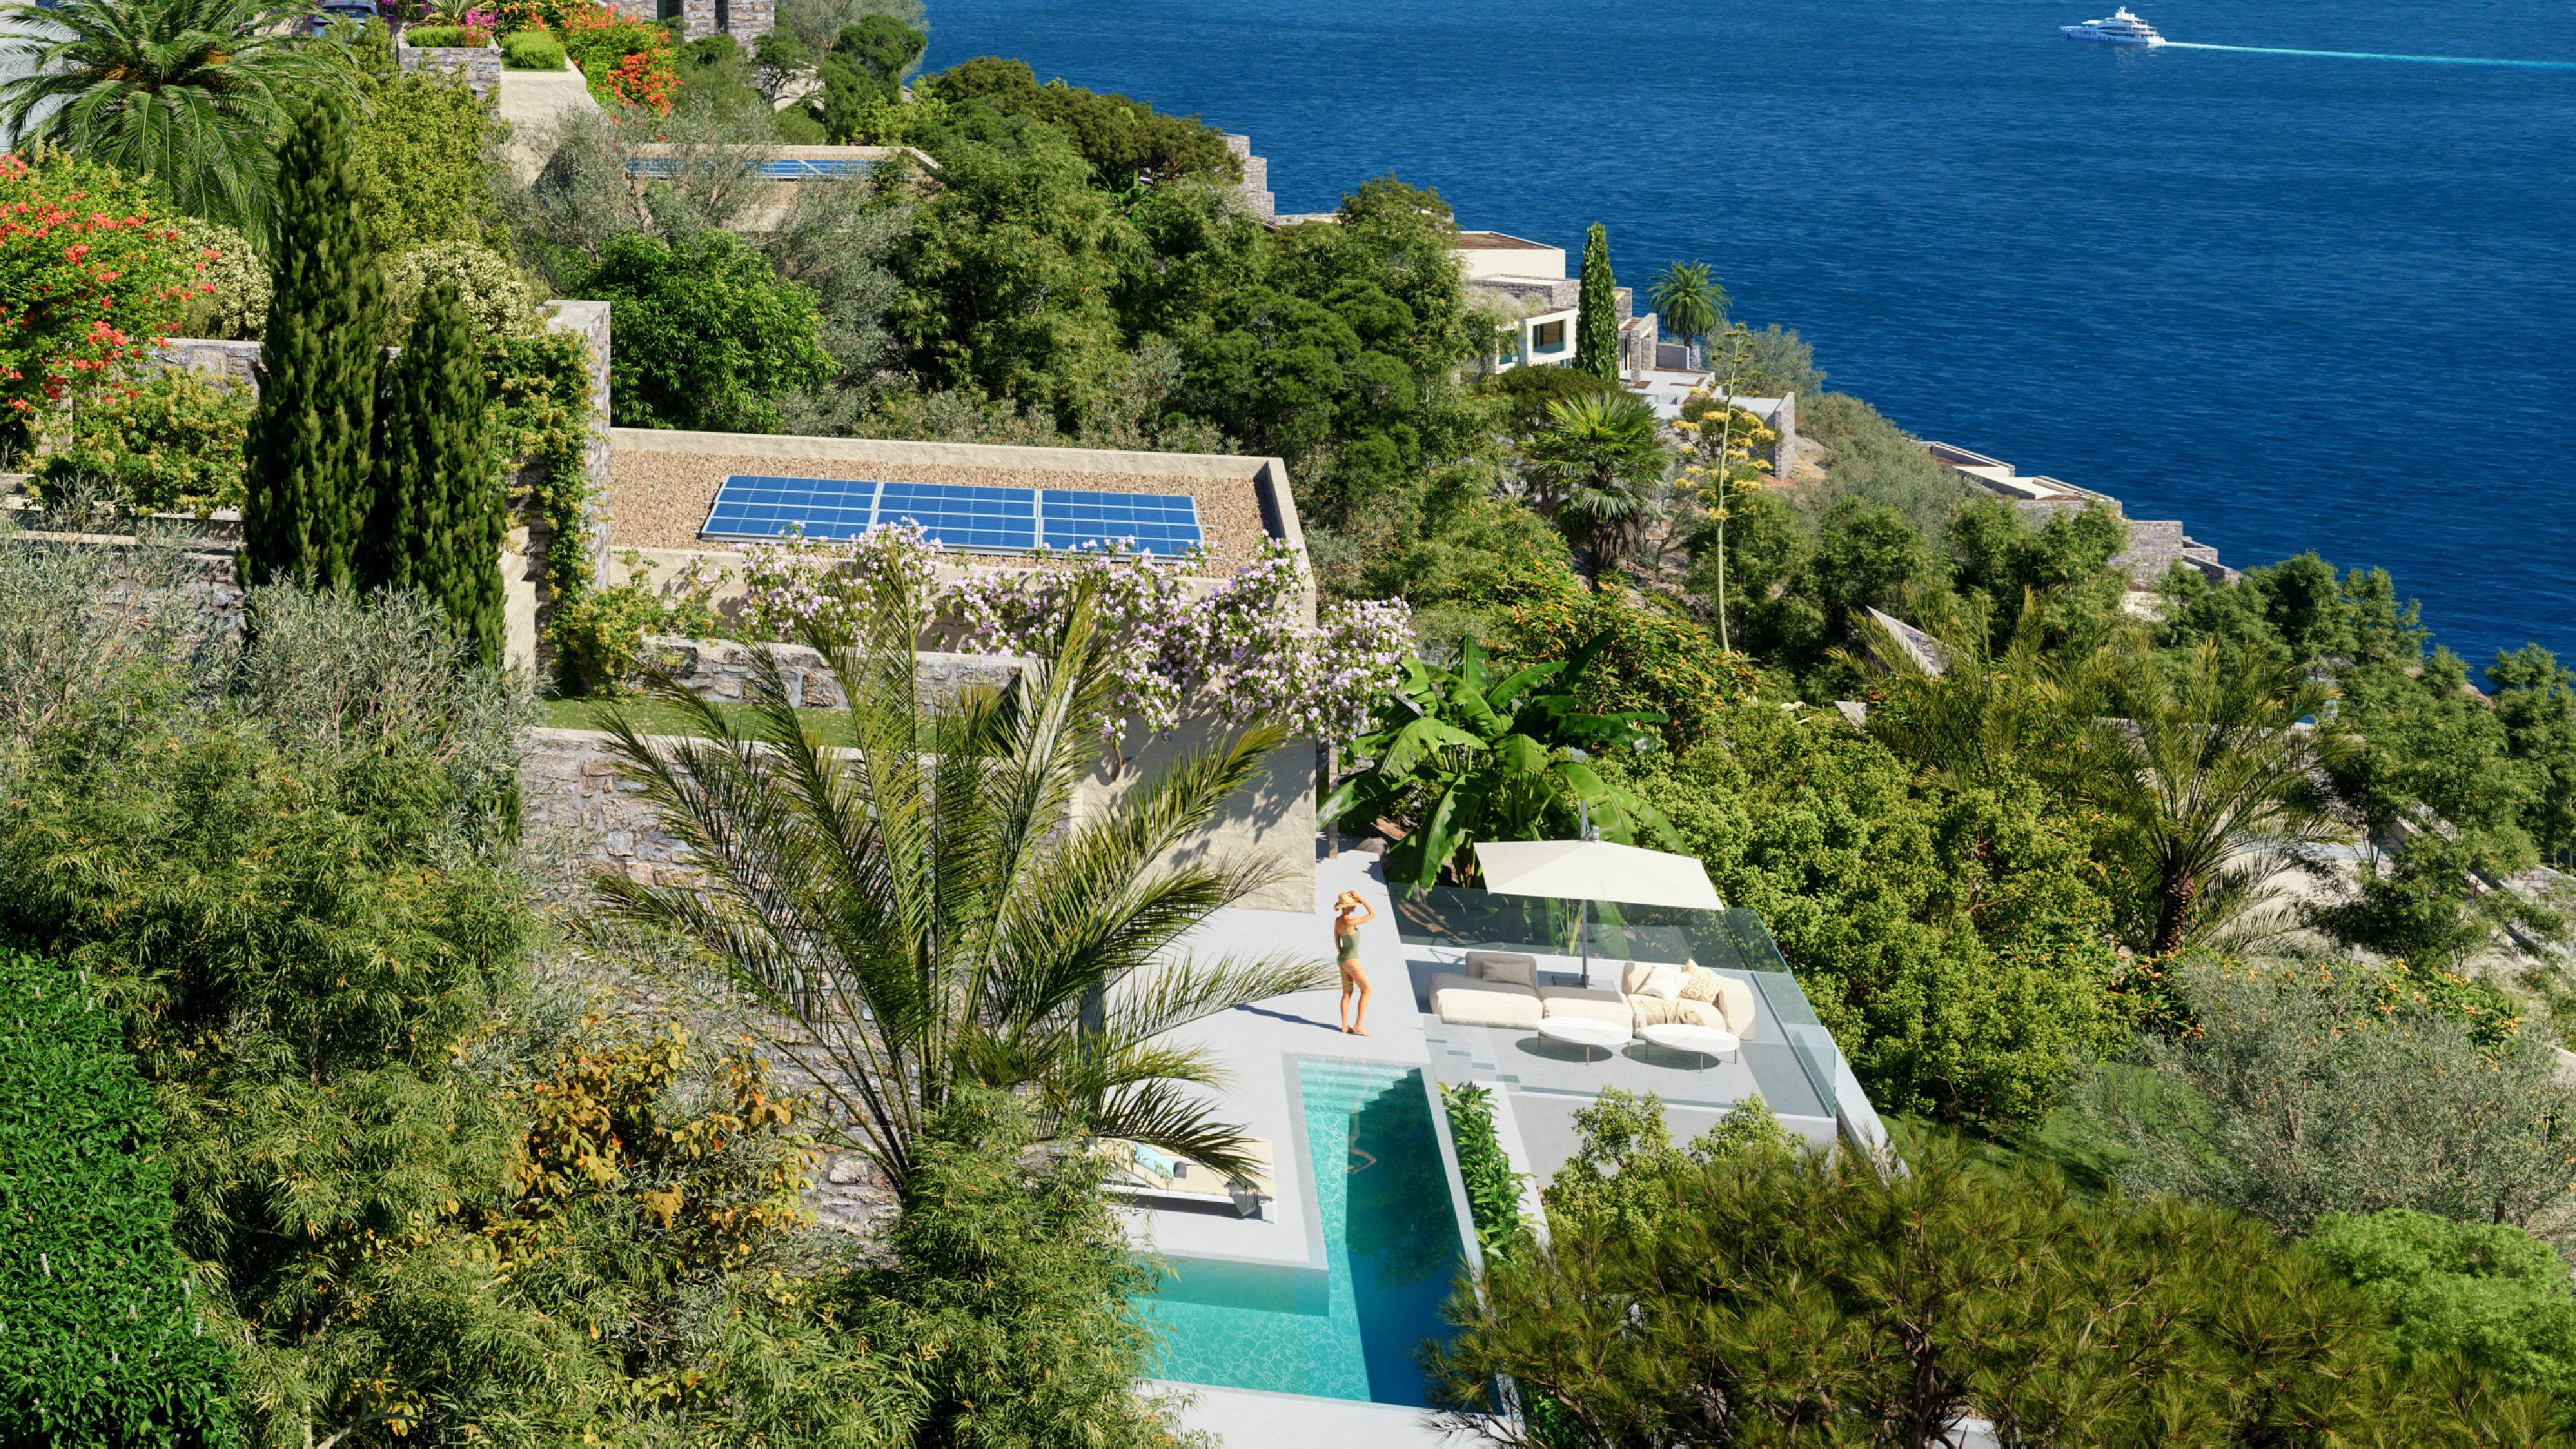 Luxury 3-Bedroom Seafront Villa in a Sustainable Private Resort in the Heart of Crete with Swimming Pool and Full Sea Views